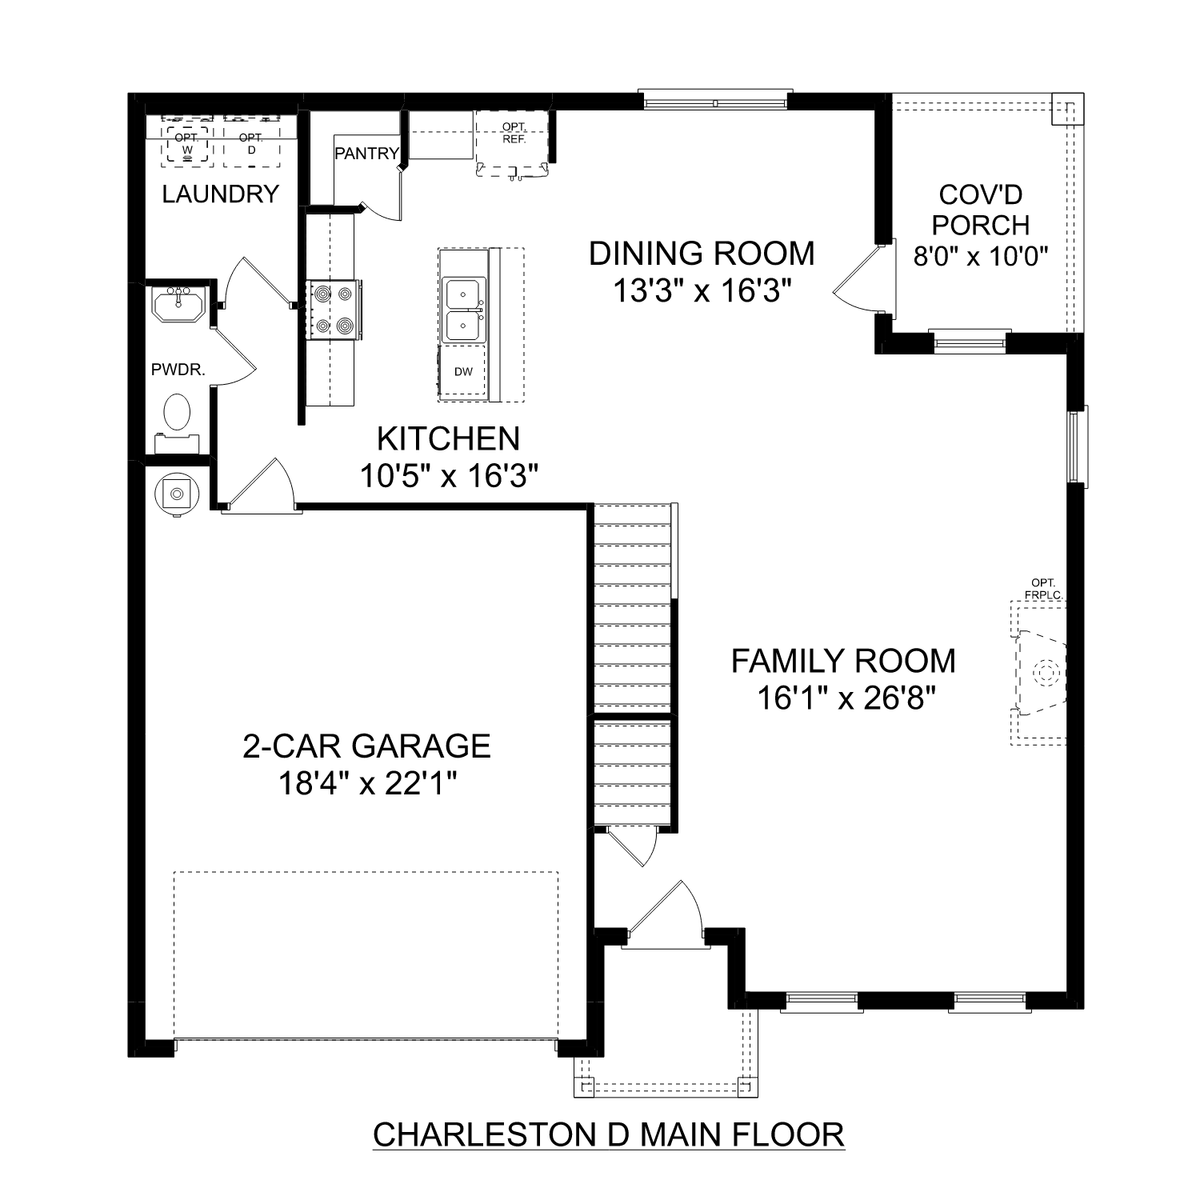 1 - The Charleston D buildable floor plan layout in Davidson Homes' Ivy Hills community.